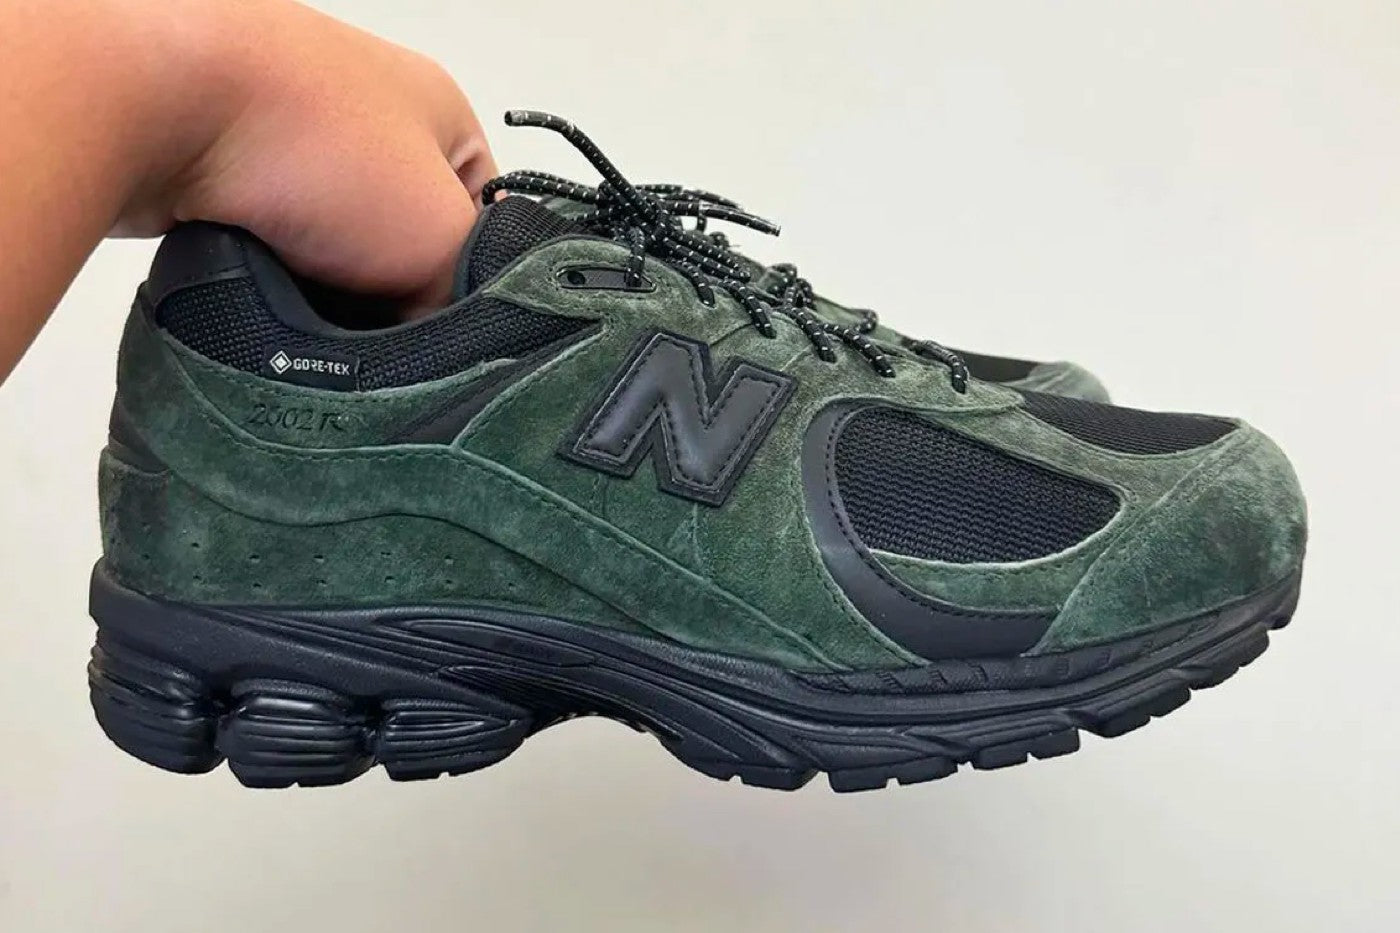 The JJJJound x New Balance 2002R “Green” Gets Covered in Gore-Tex - The ...